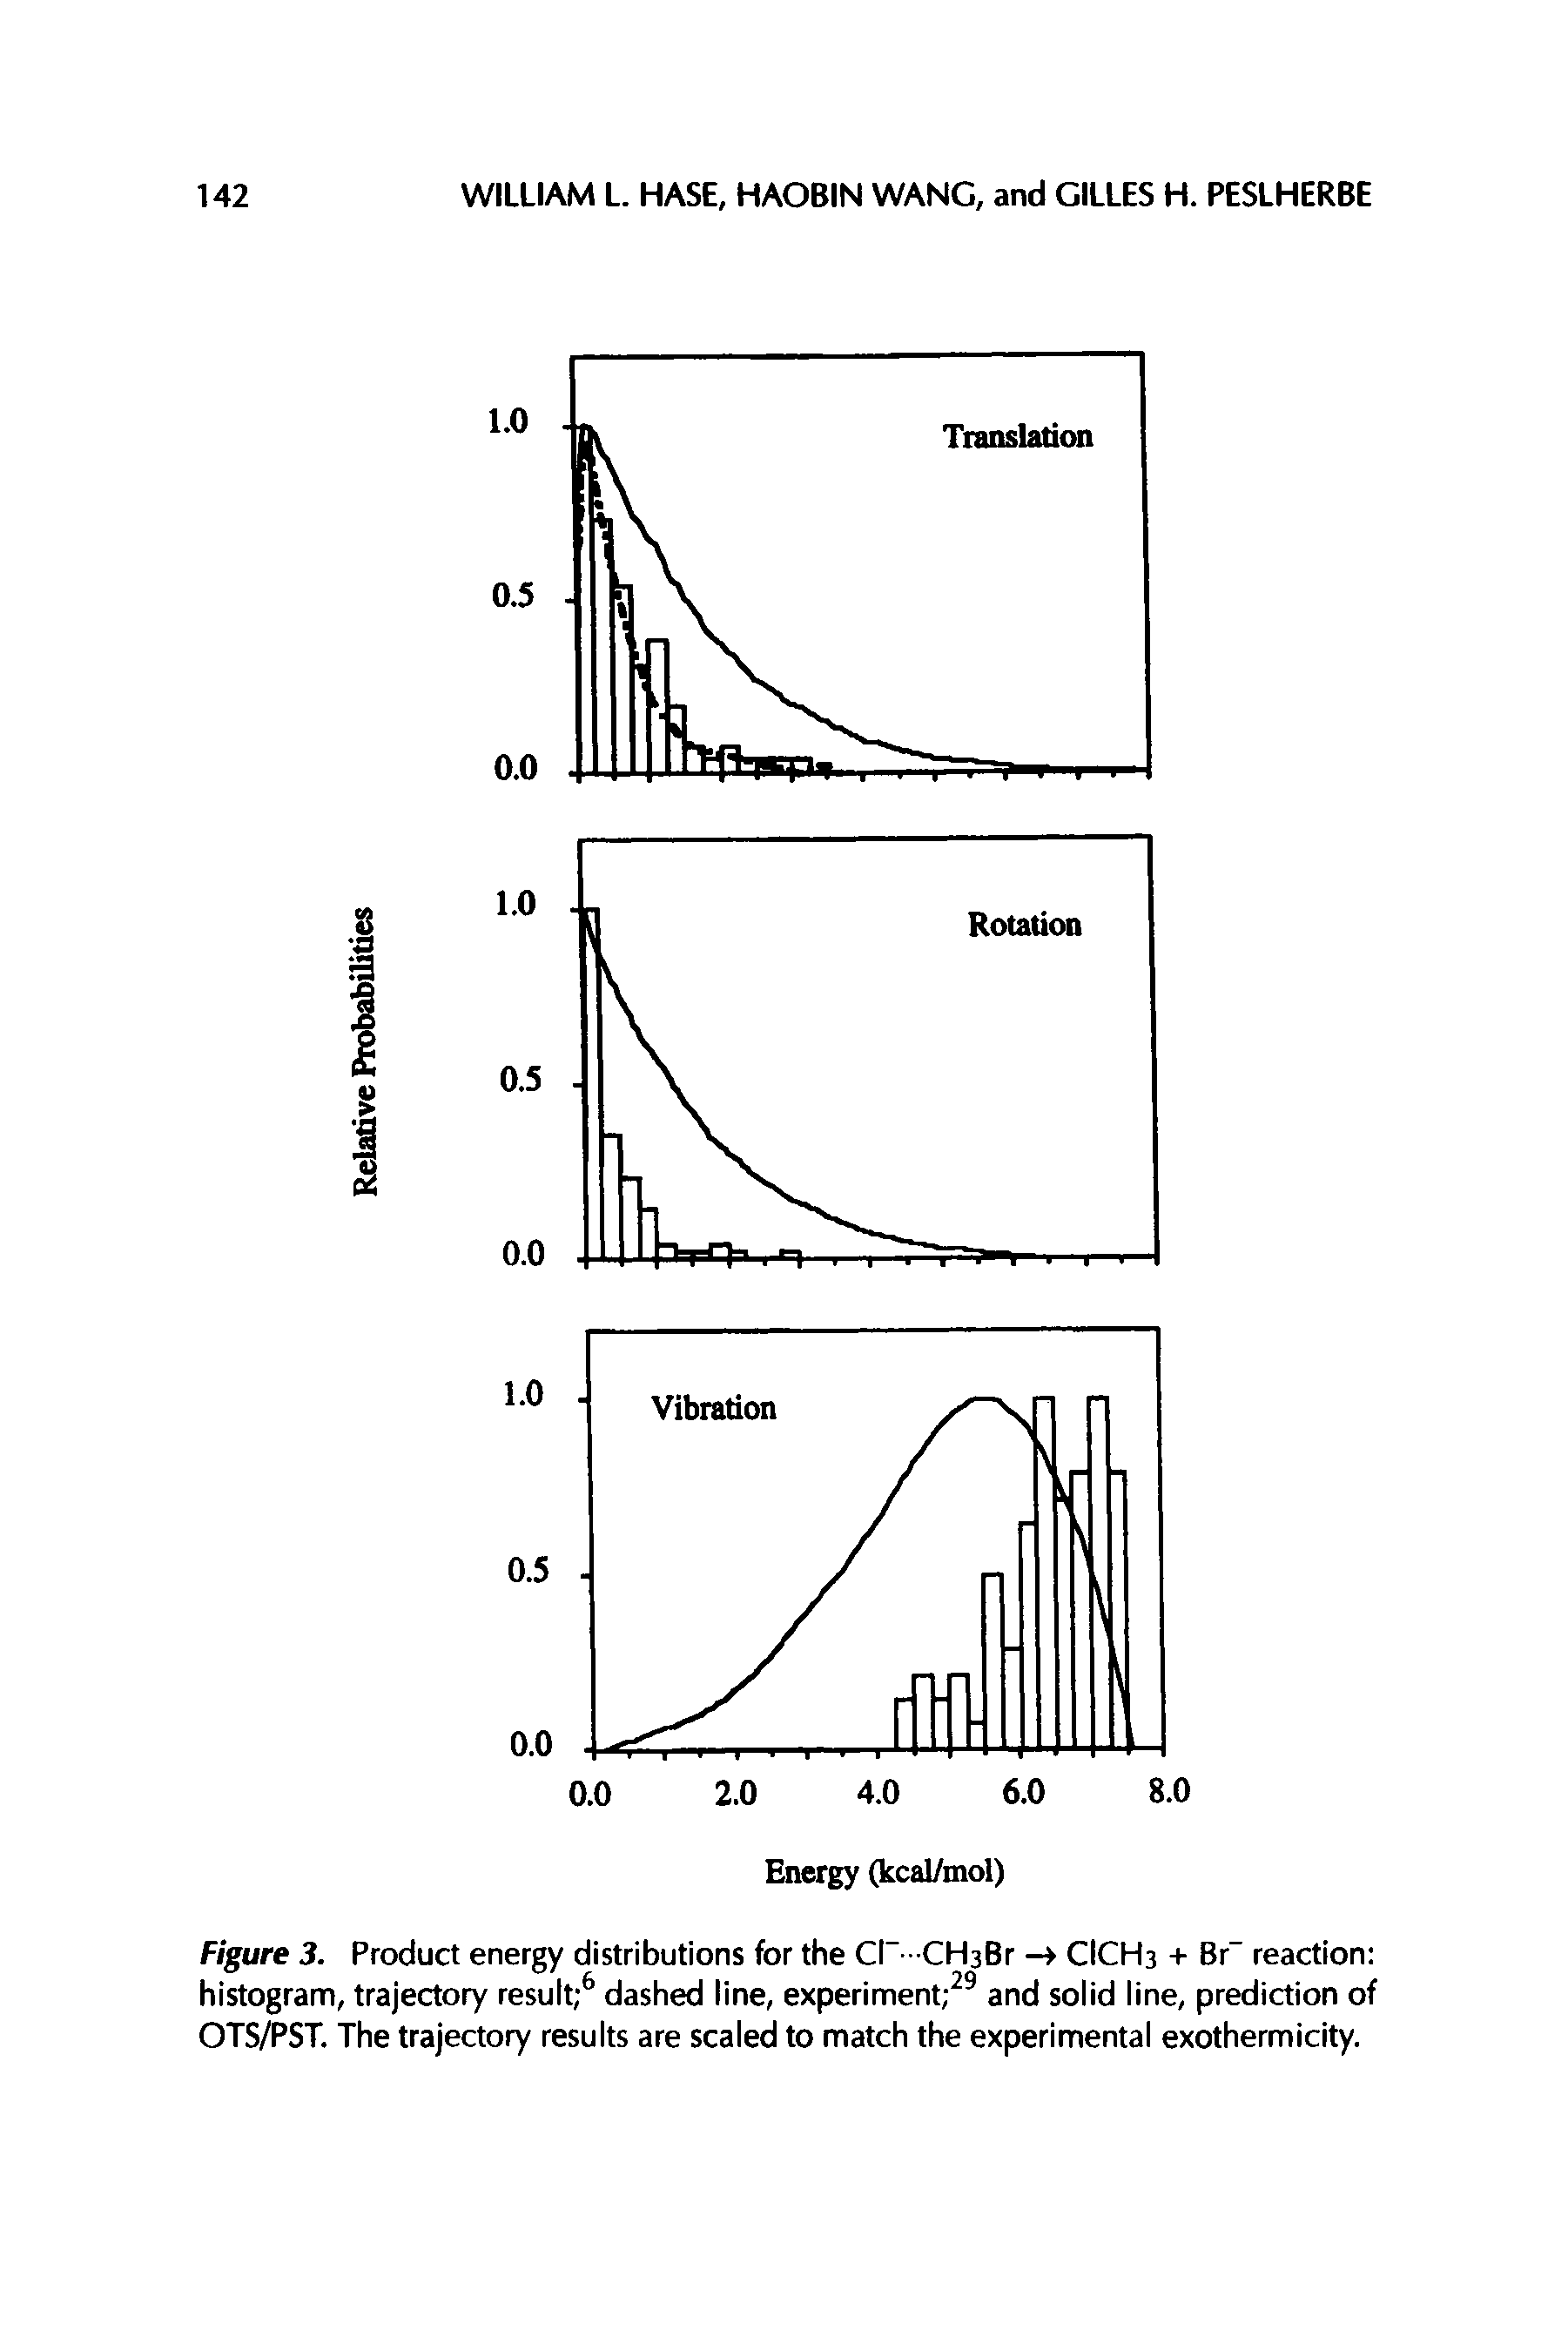 Figure 3. Product energy distributions for the Cl" CHaBr - CICH3 + Br reaction histogram, trajectory result 6 dashed line, experiment 29 and solid line, prediction of OTS/PST. The trajectory results are scaled to match the experimental exothermicity.